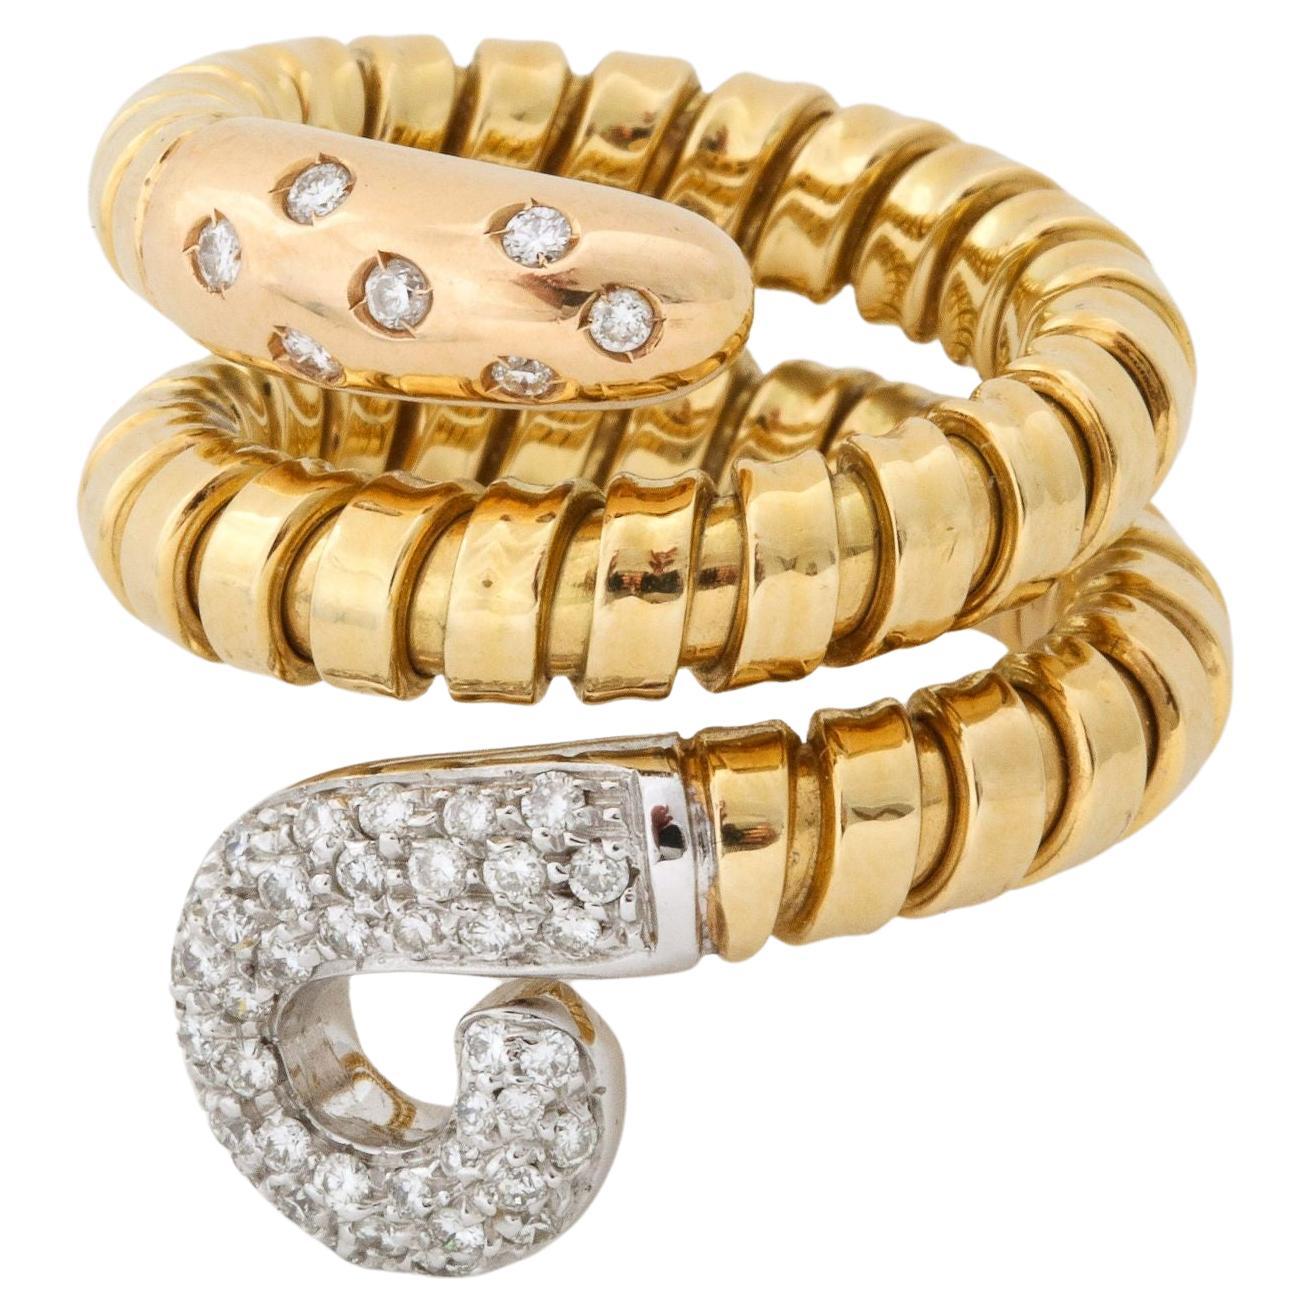  Gold Snake  Tubogas Ring With Diamond Head And Tail 18K For Sale